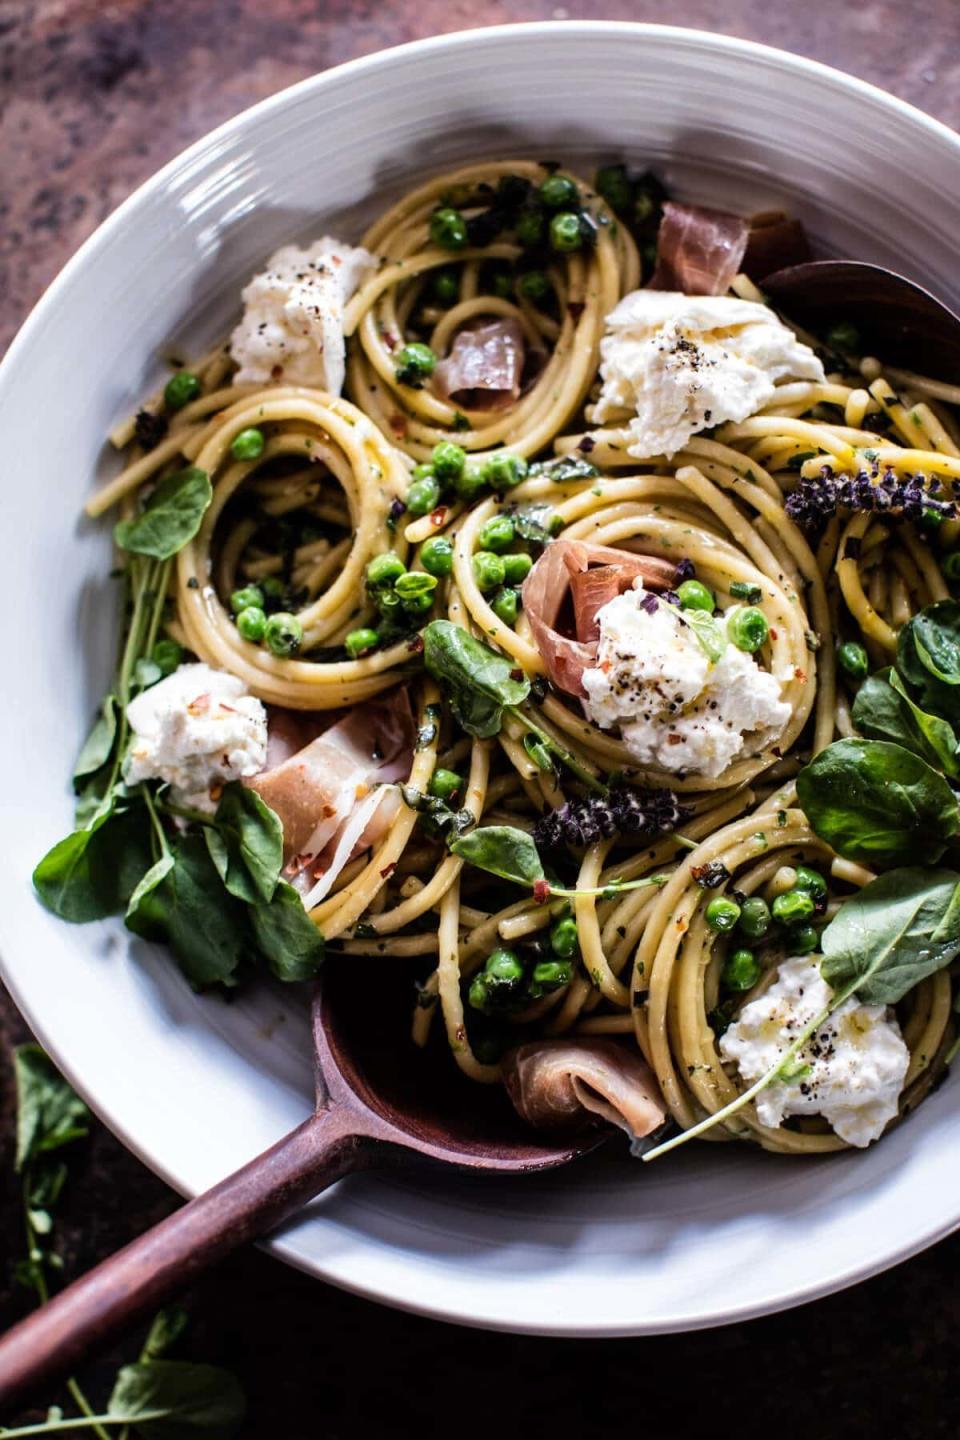 <strong>Get the <a href="https://www.halfbakedharvest.com/simple-buttery-spring-pea-burrata-pasta-prosciutto/?highlight=pasta" target="_blank">Simple Buttery Spring Pea and Burrata Pasta With Prosciutto</a>&nbsp;recipe from Half Baked Harvest</strong>